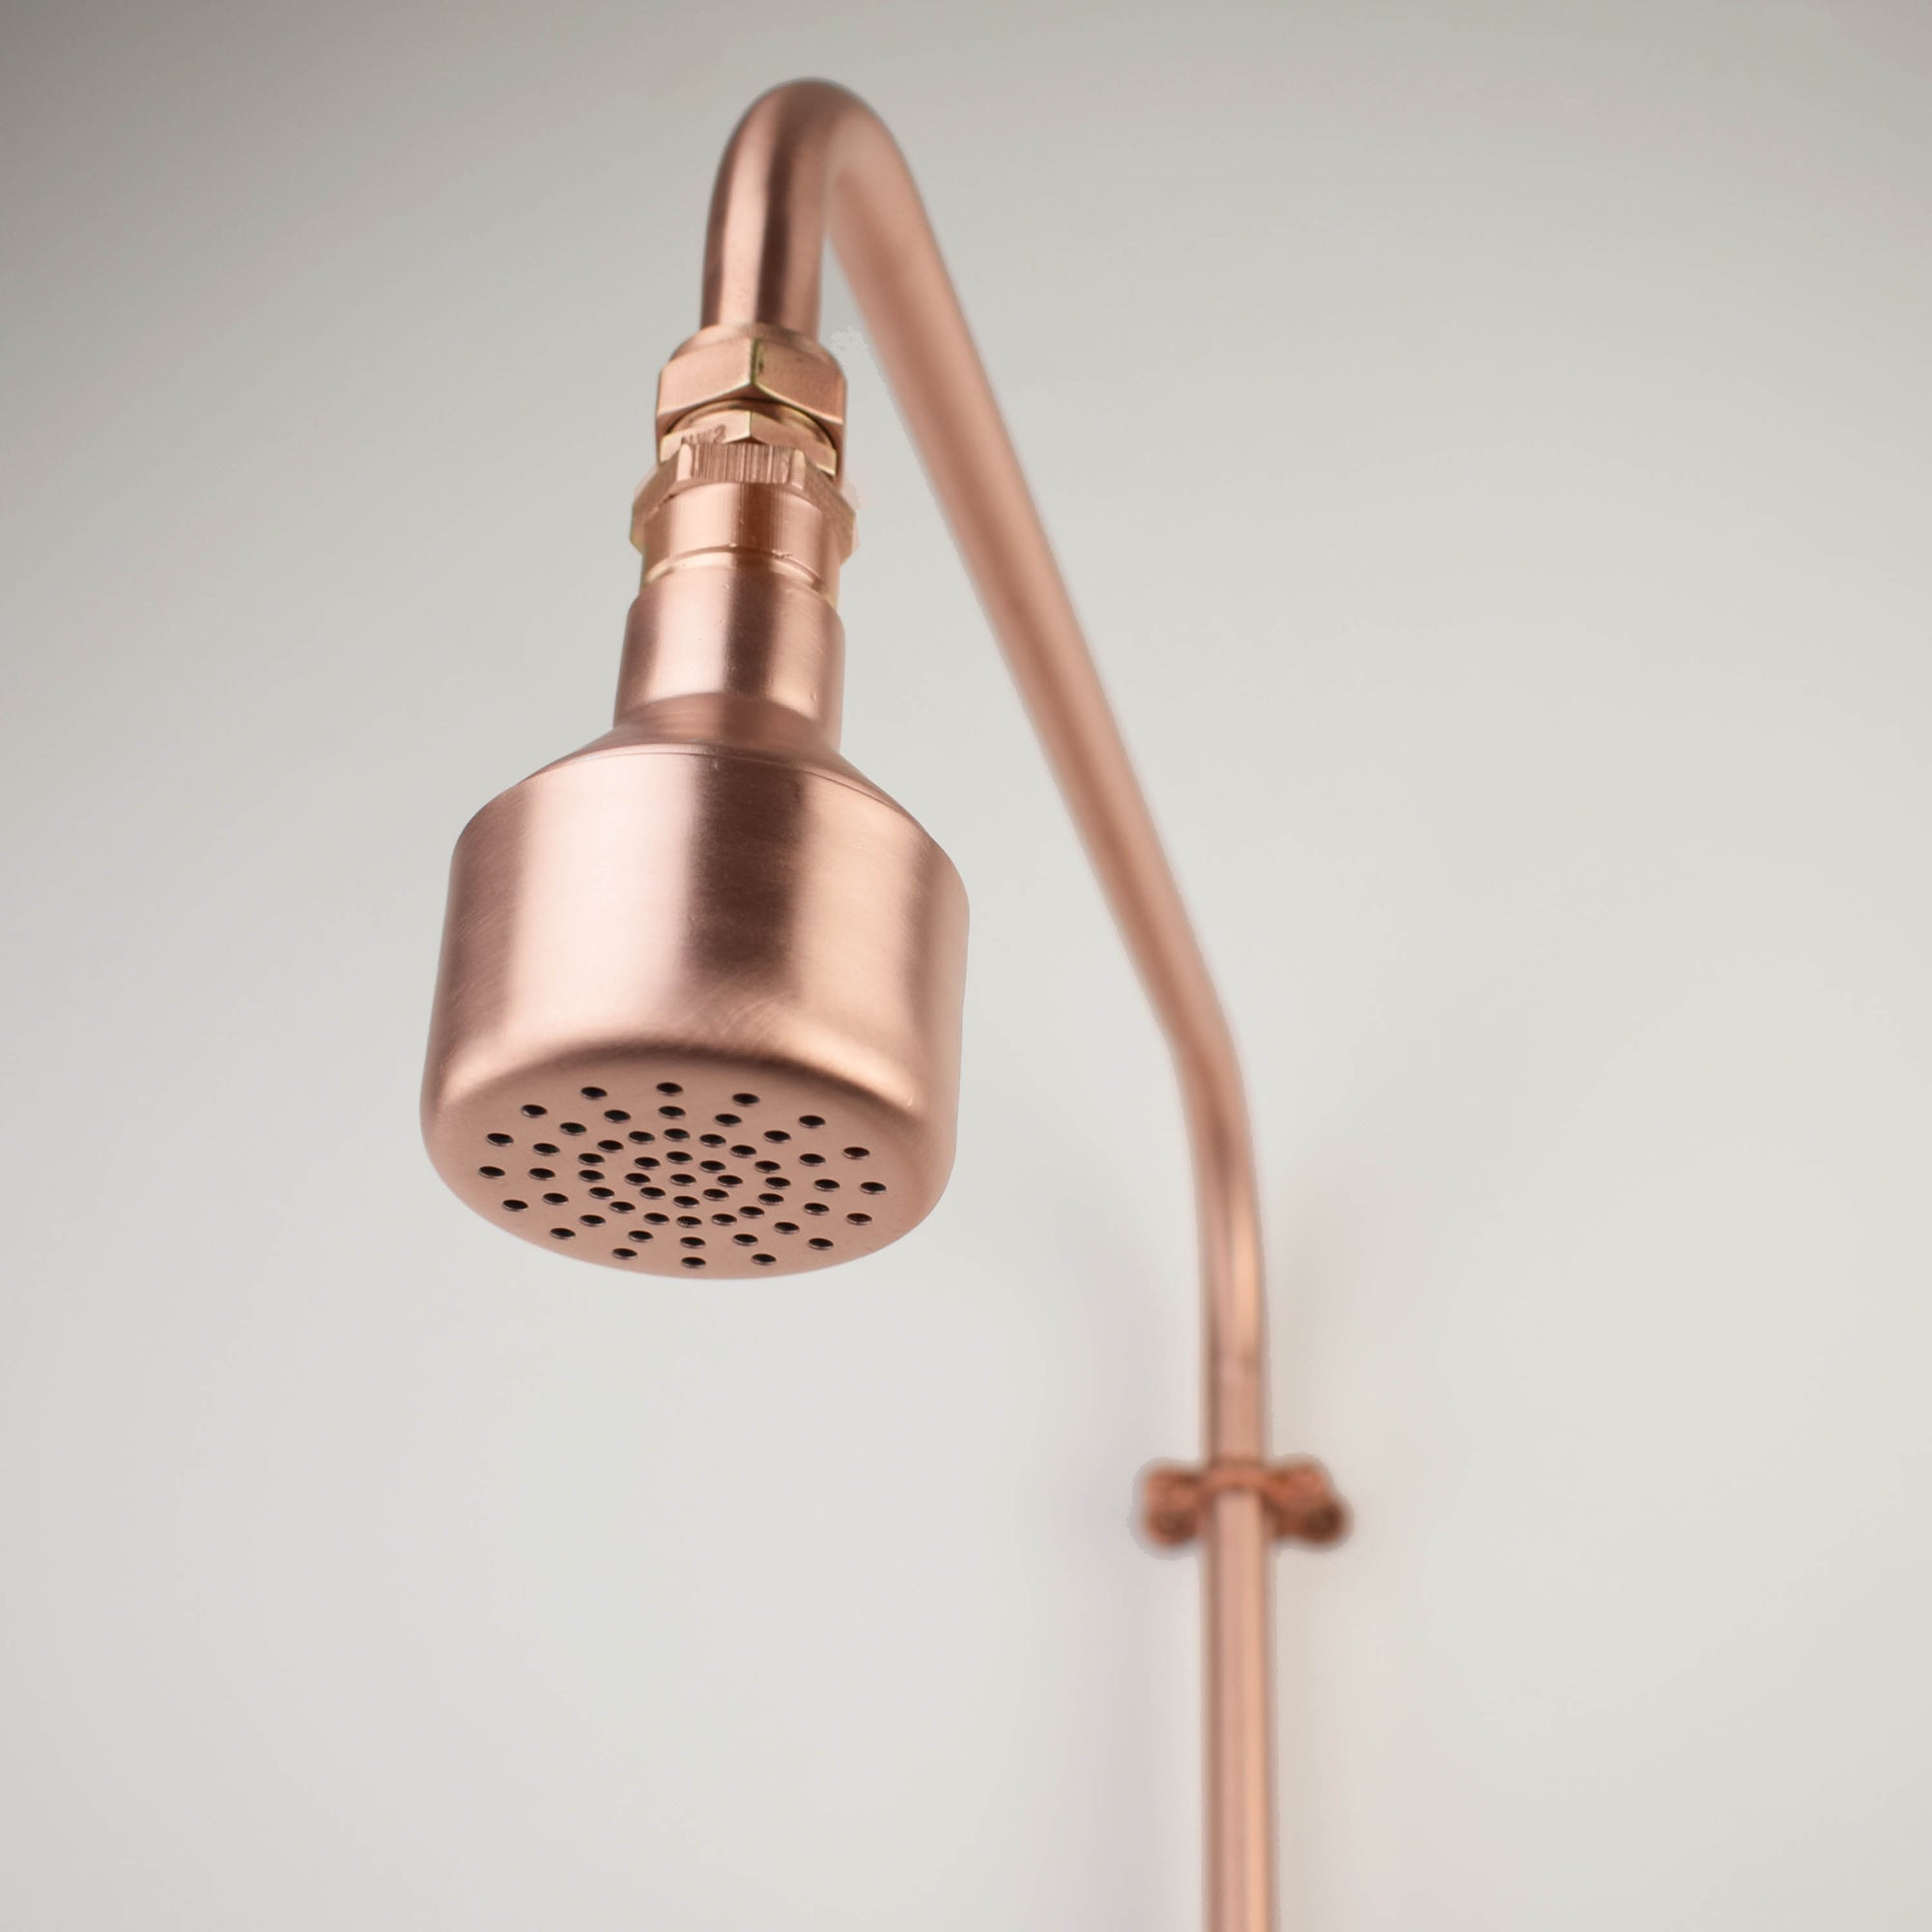 copper shower head for a relaxing out door living space with natural health benefits 